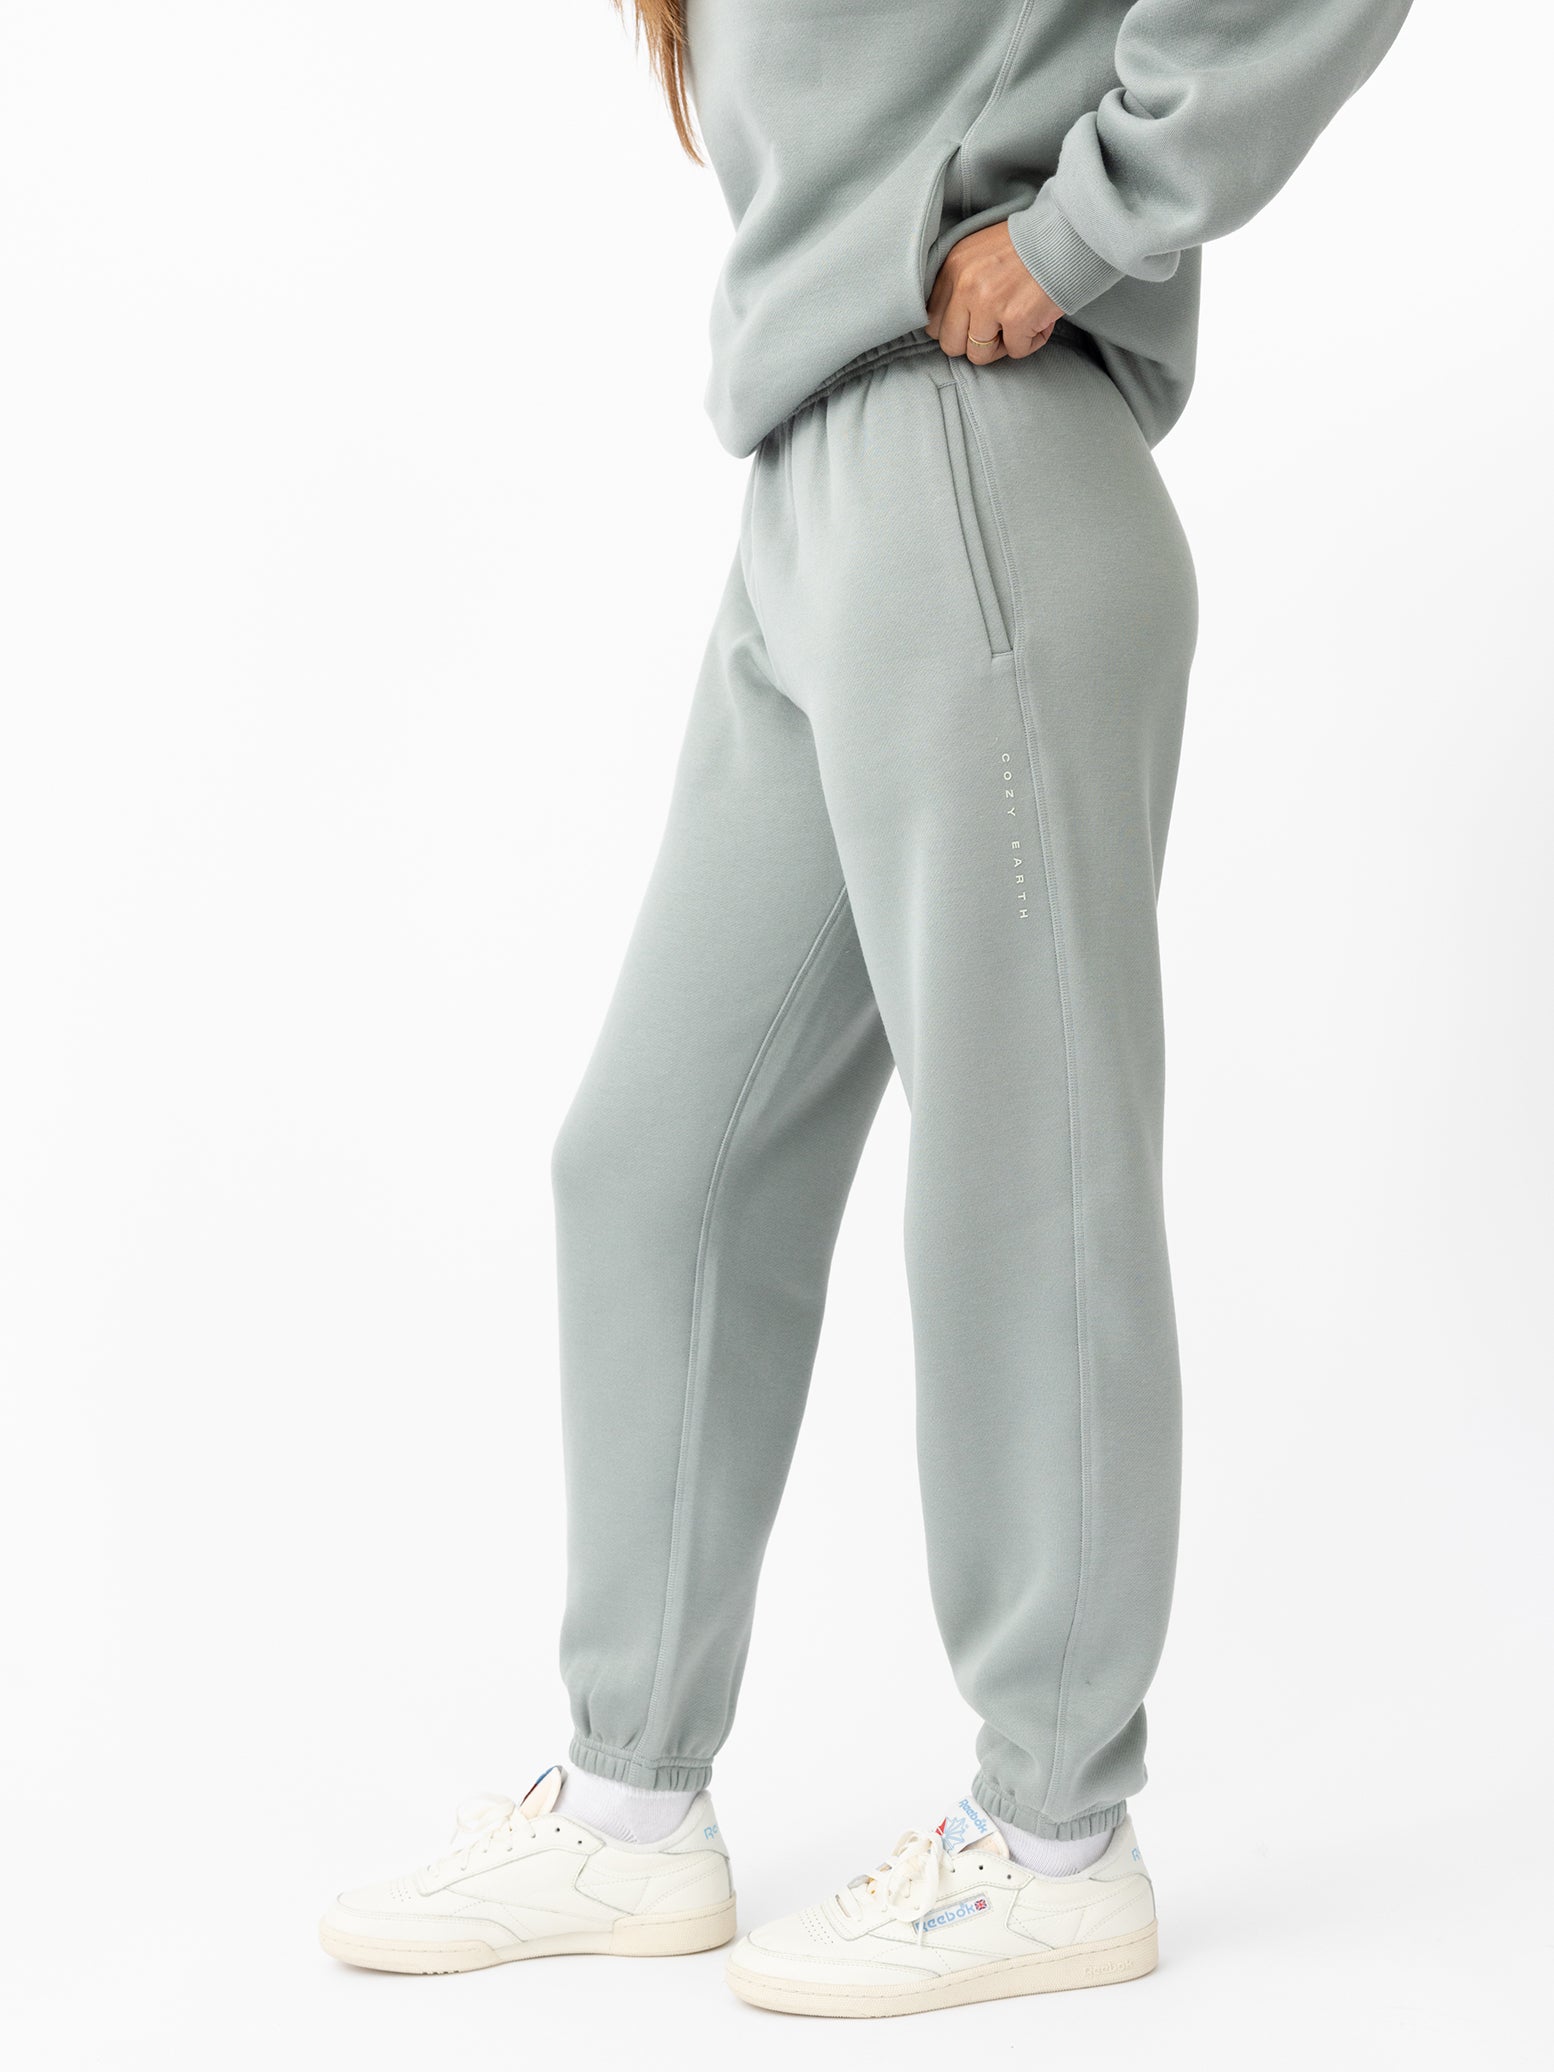 Woman wearing haze cityscape joggers with white background |Color:Haze